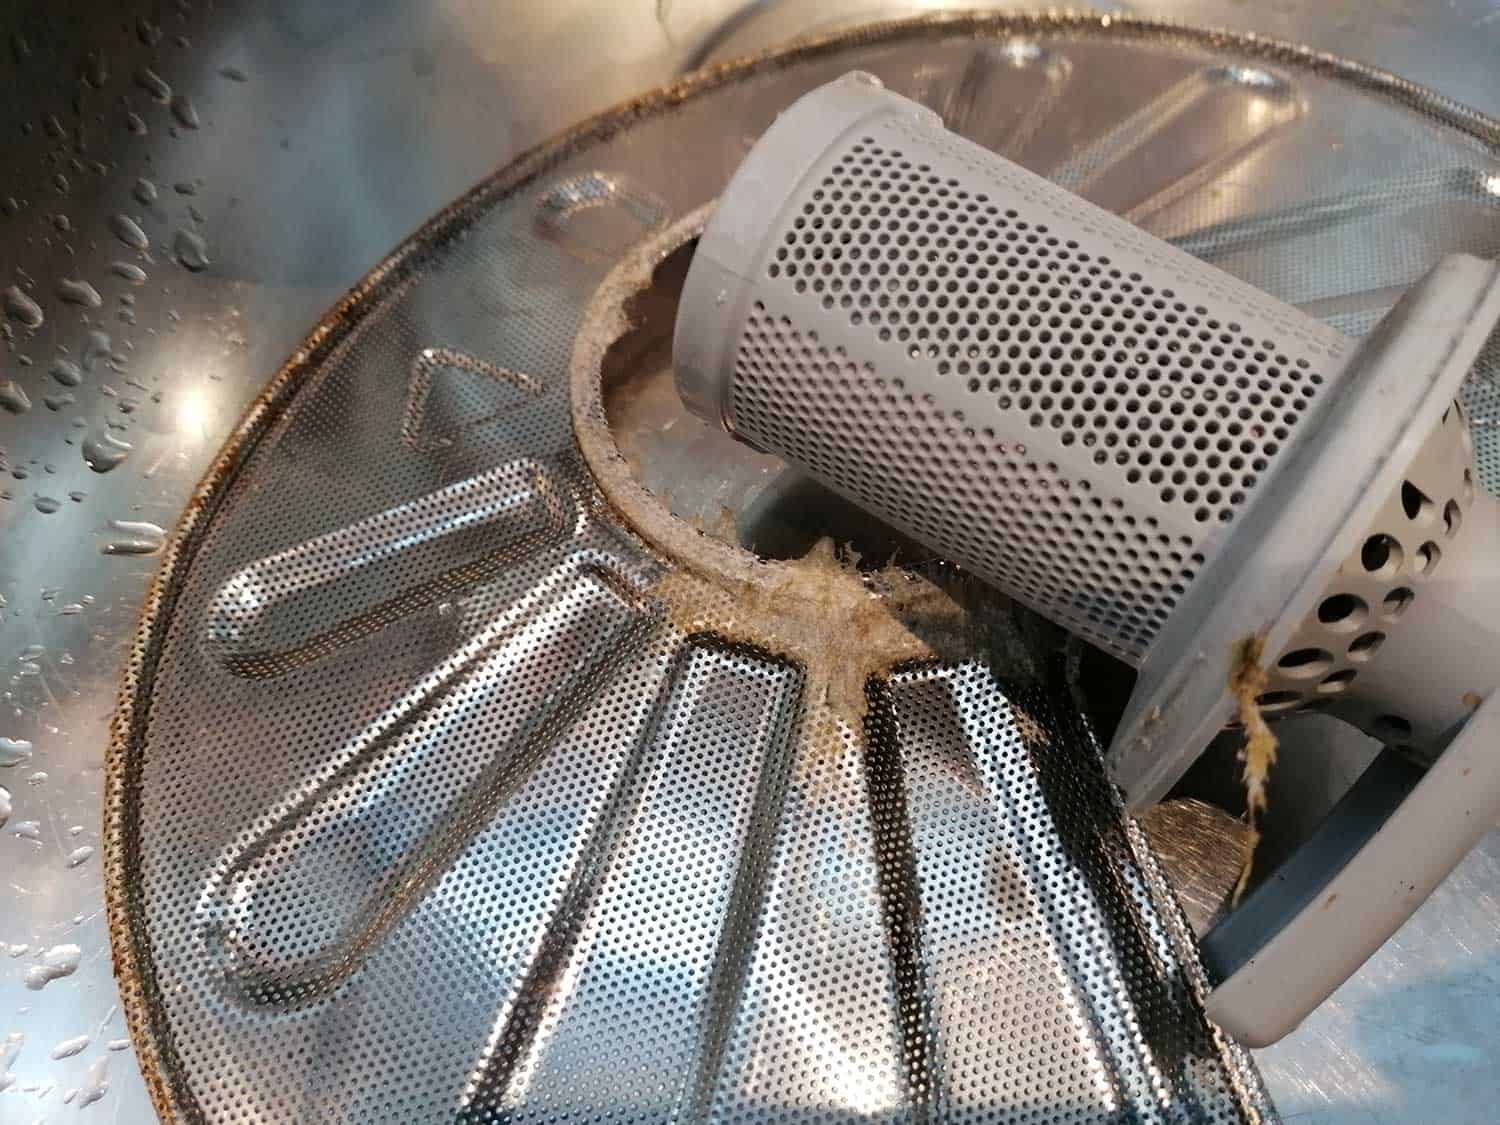 A dishwasher filter with dirt